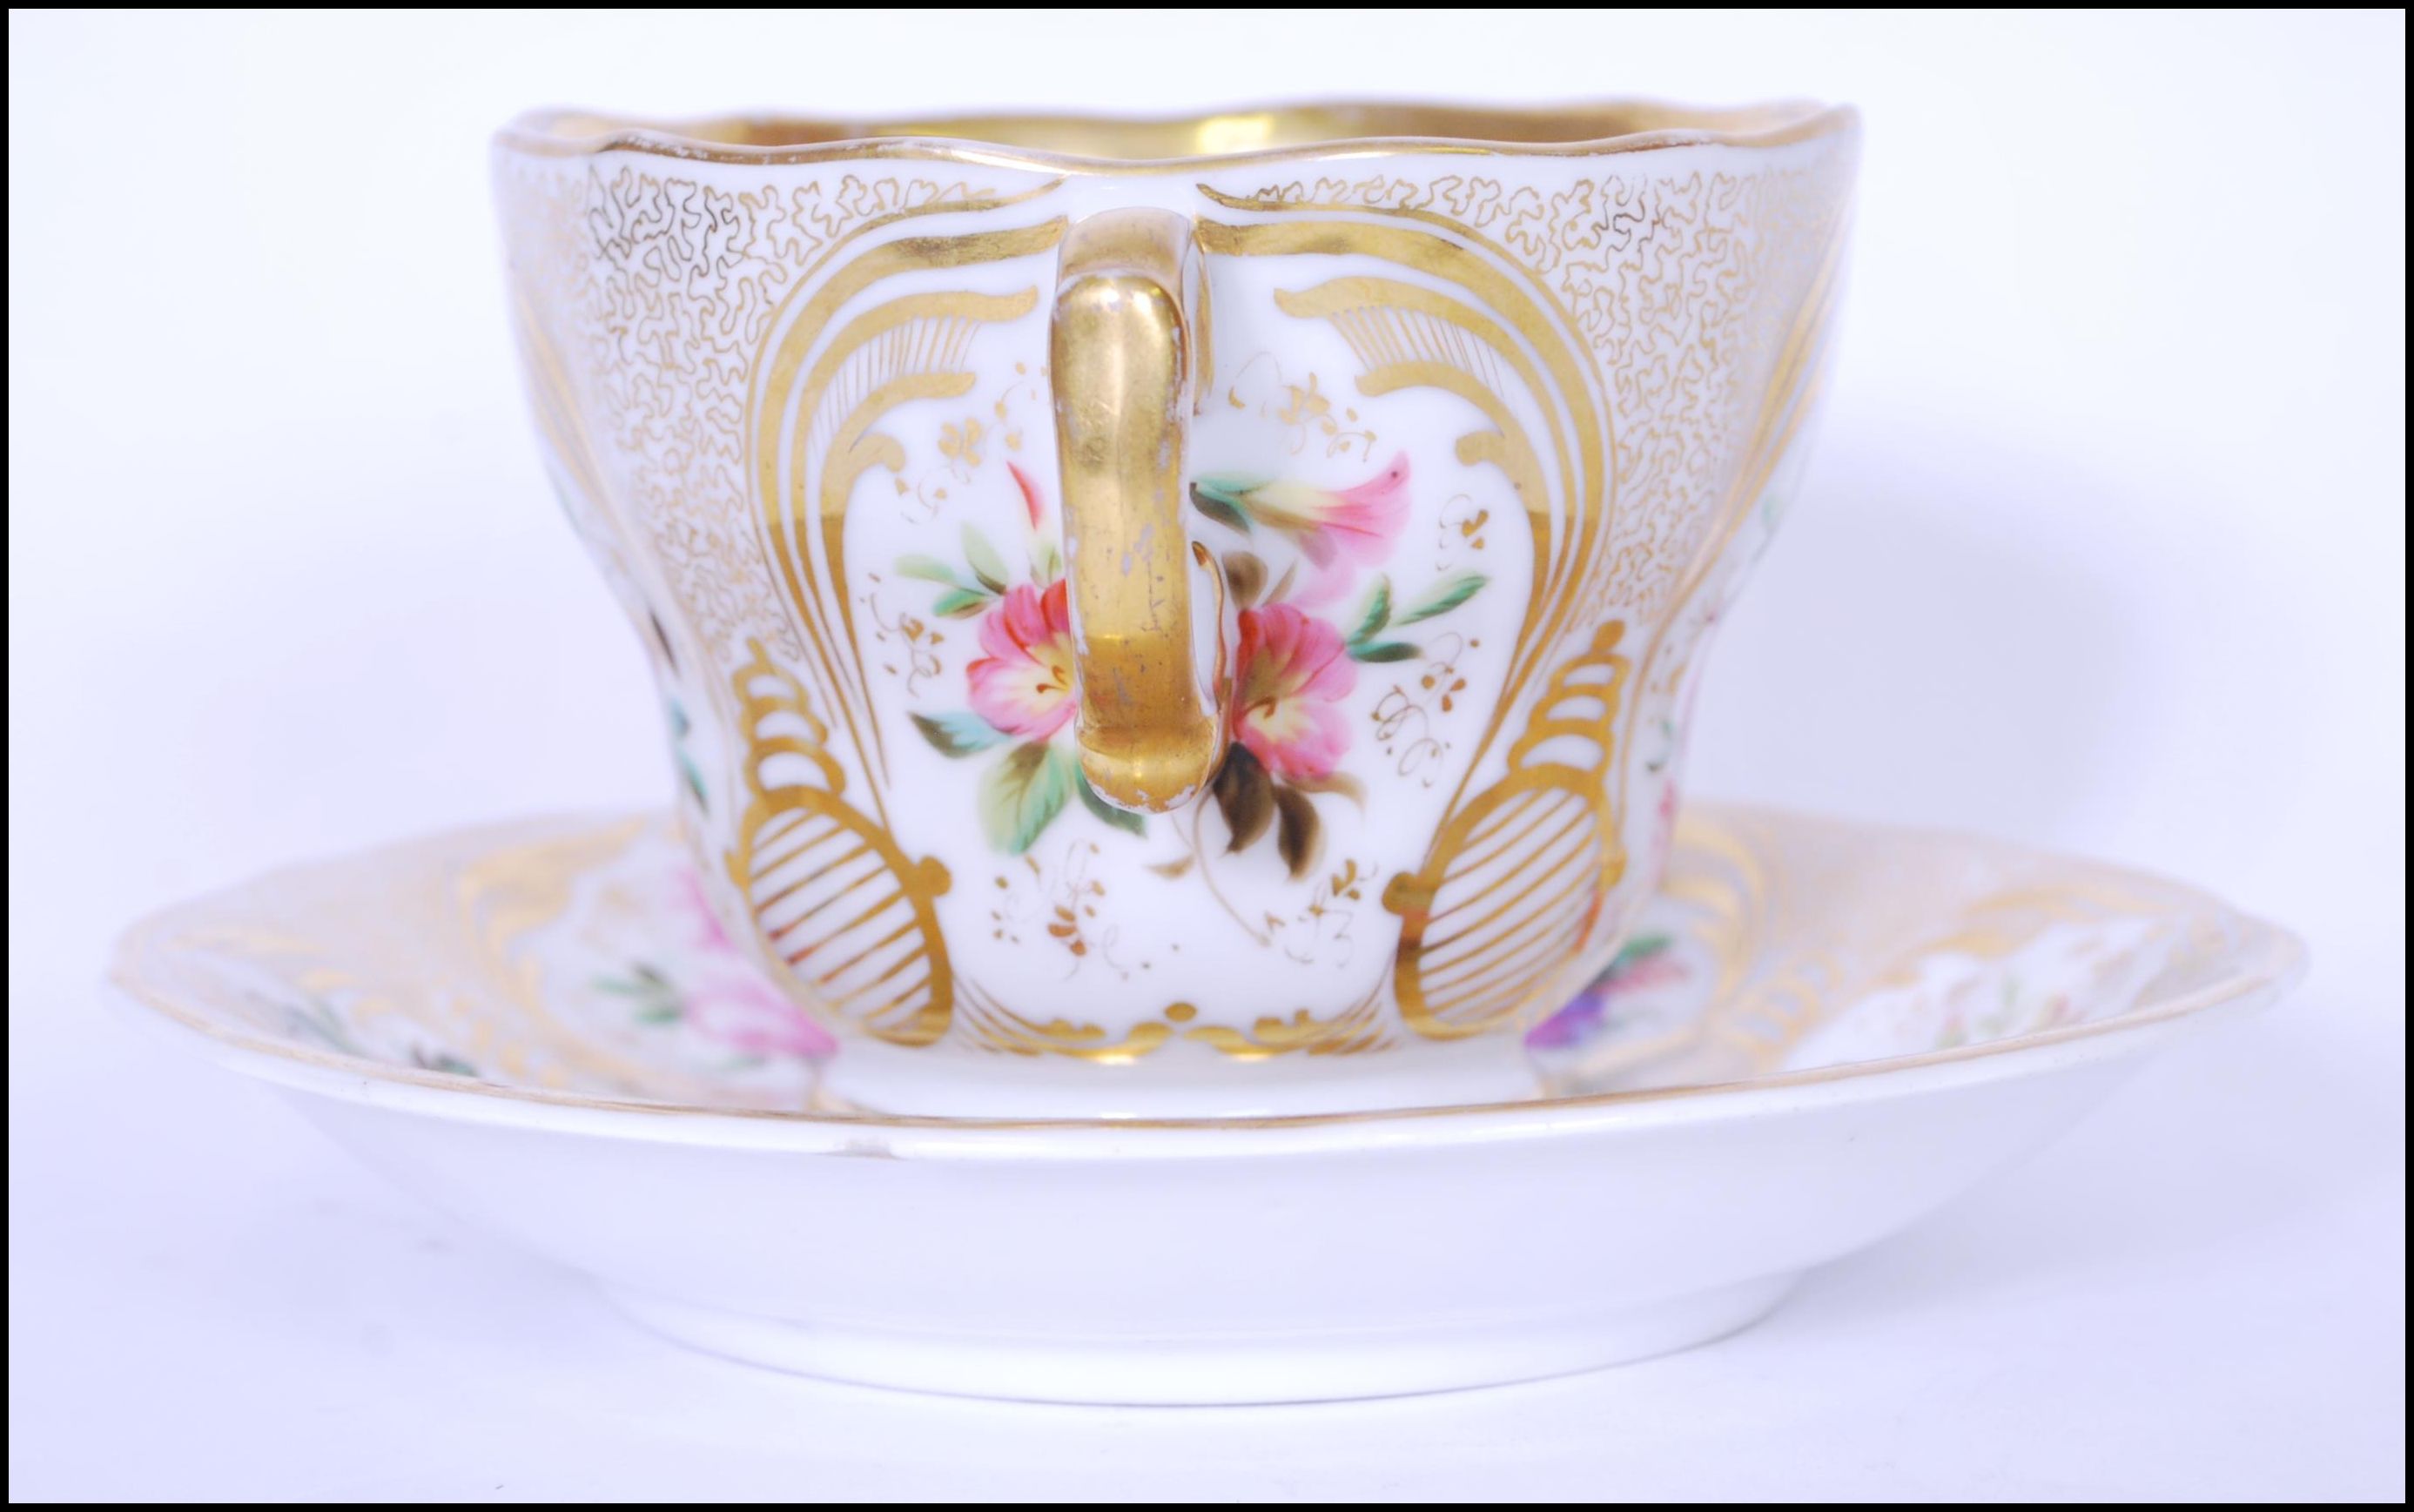 RUSSIAN IMPERIAL PORCELAIN GARDNER BREAKFAST CUP AND SAUCER - Image 3 of 9